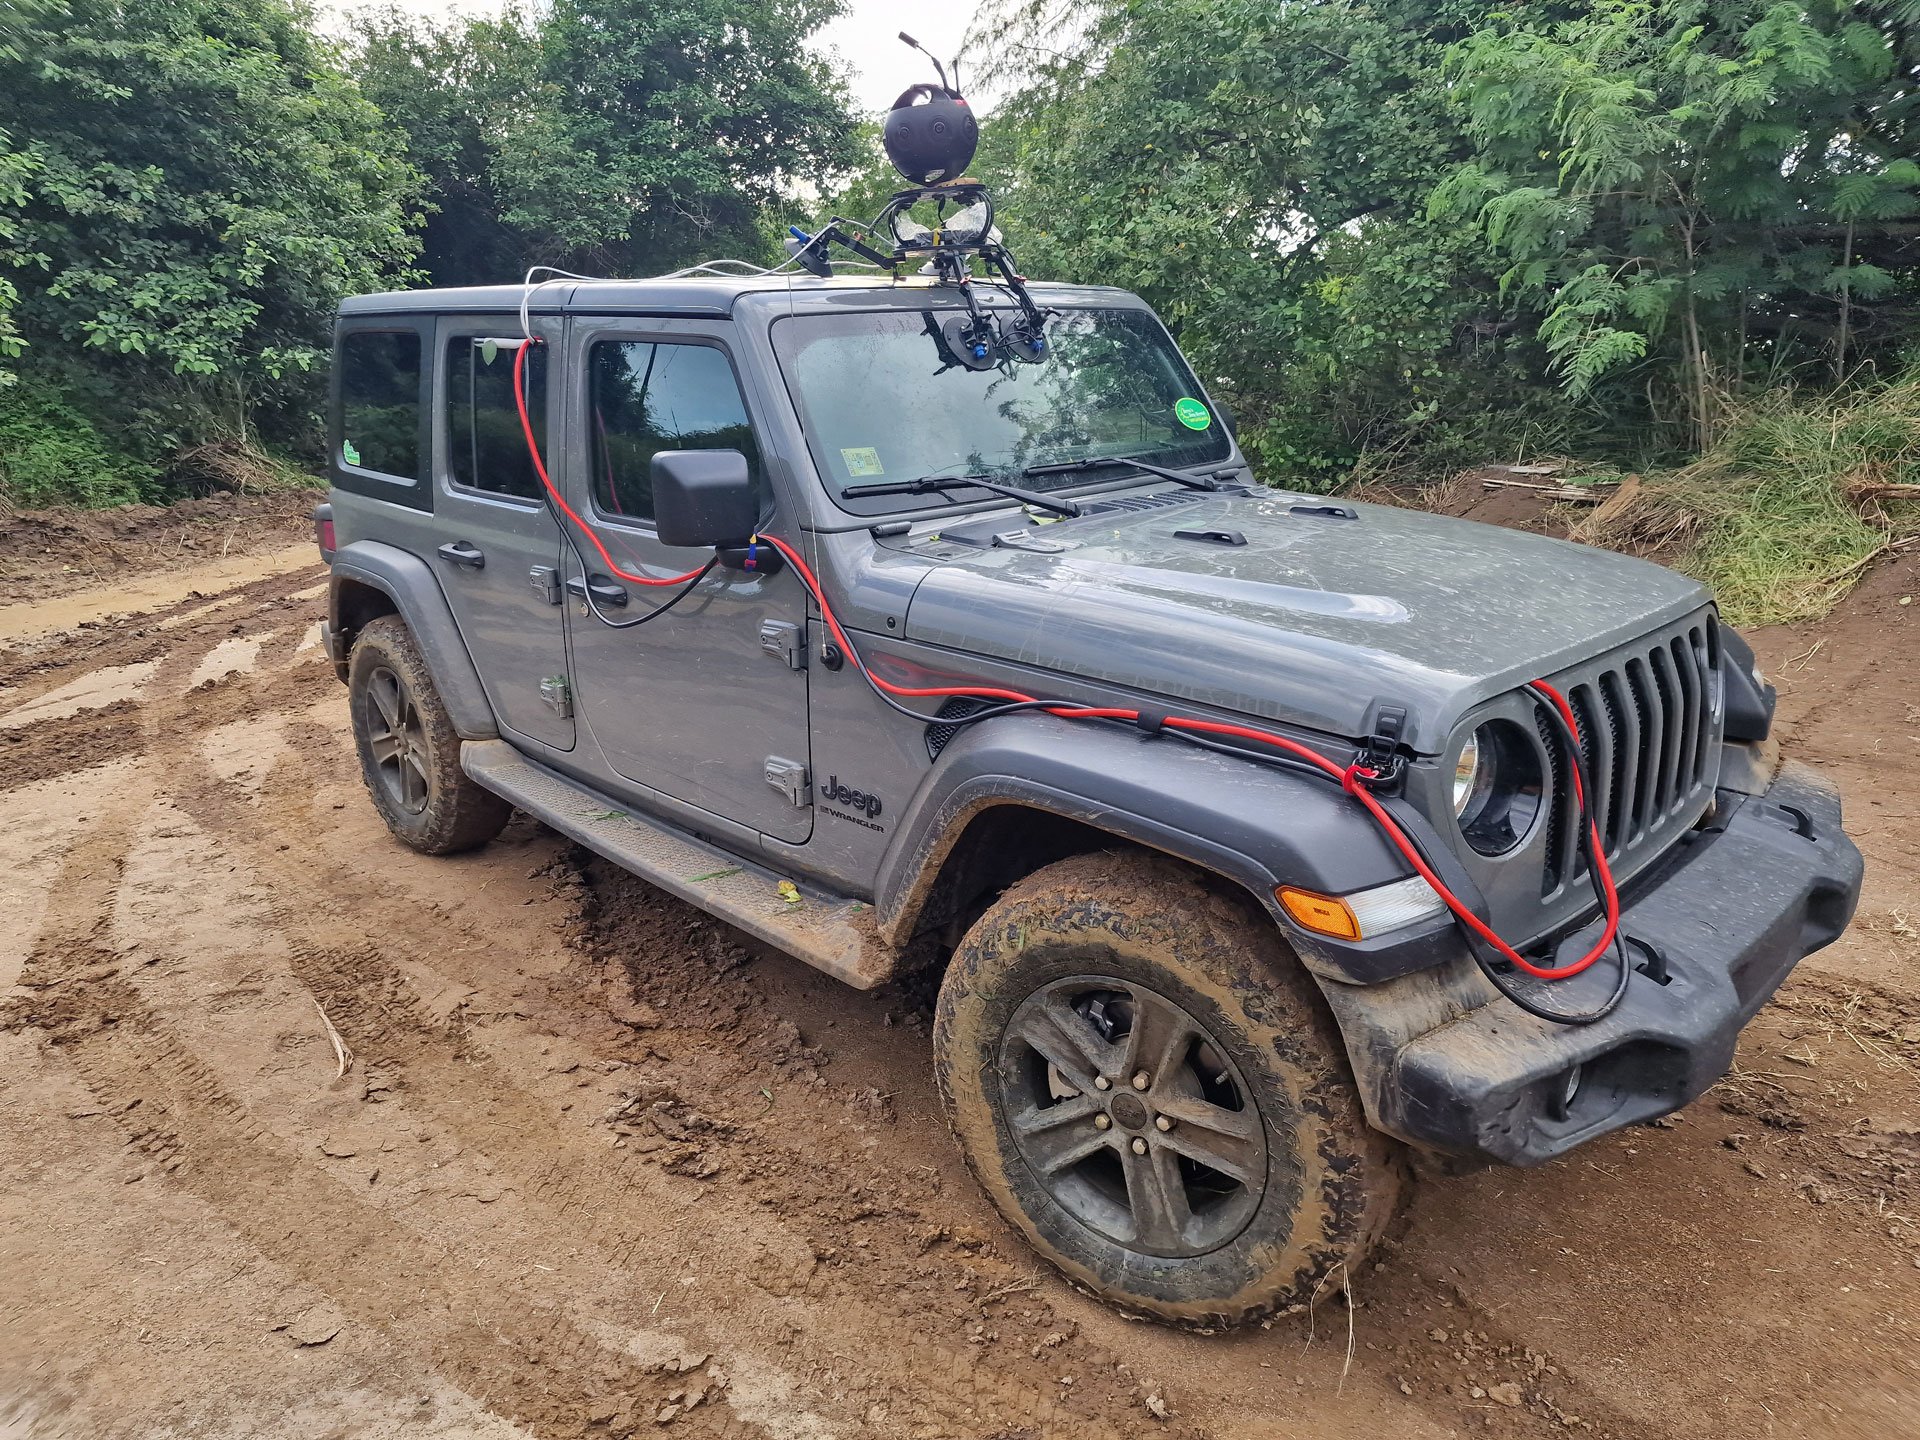 360 camera attached to a Jeep in Puerto Rico